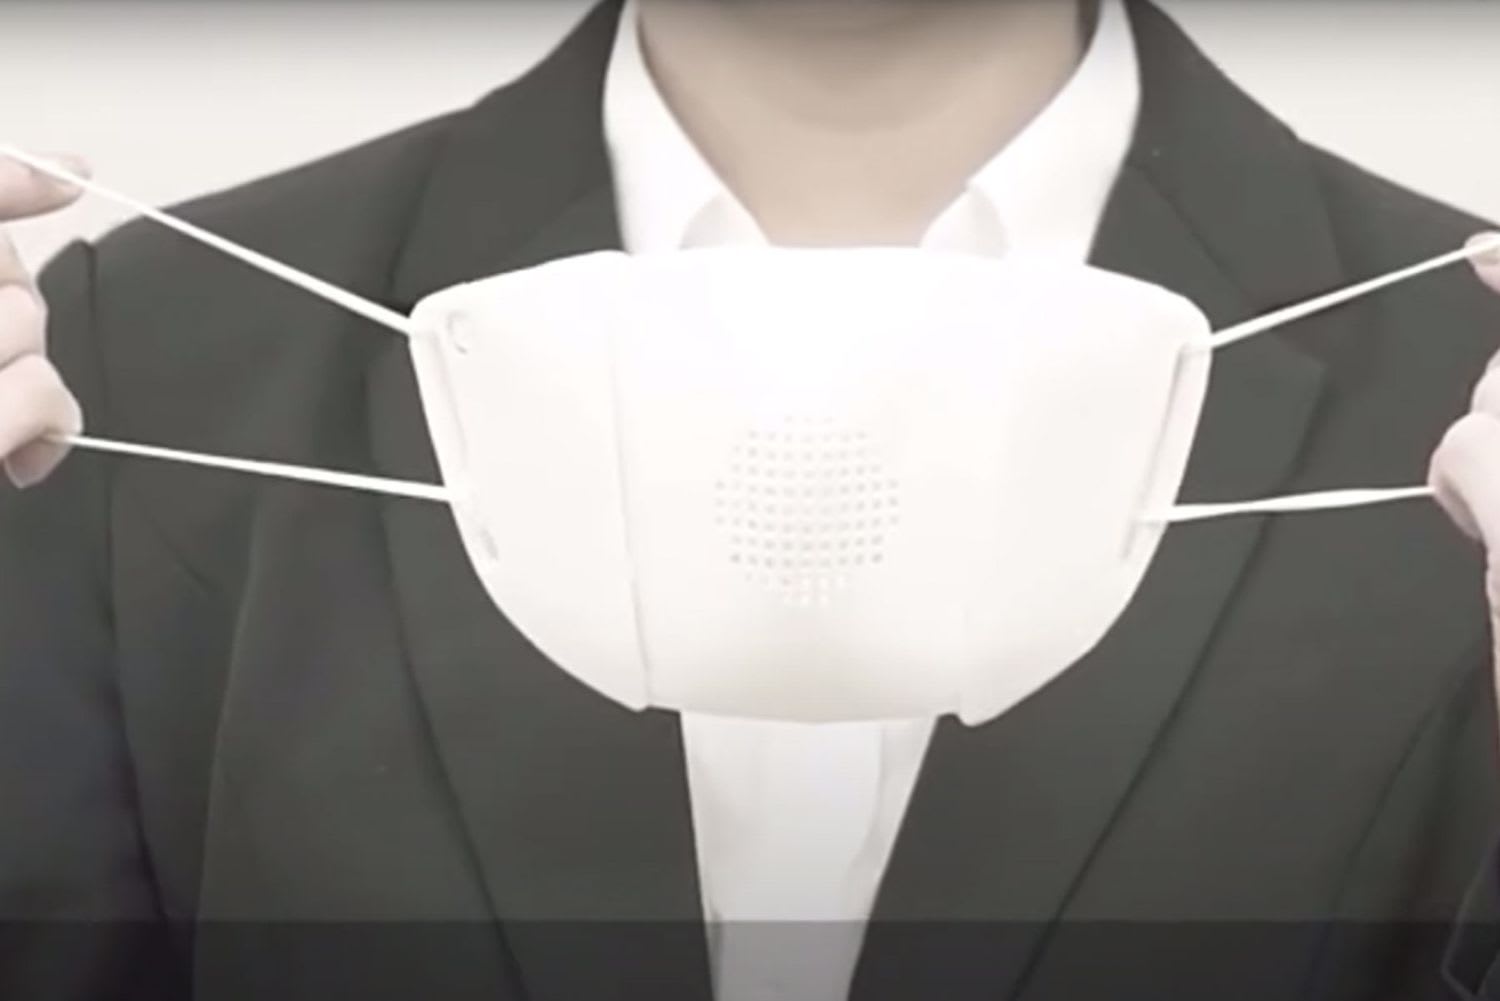 This Face Mask Can Translate What You're Saying Into 8 Languages